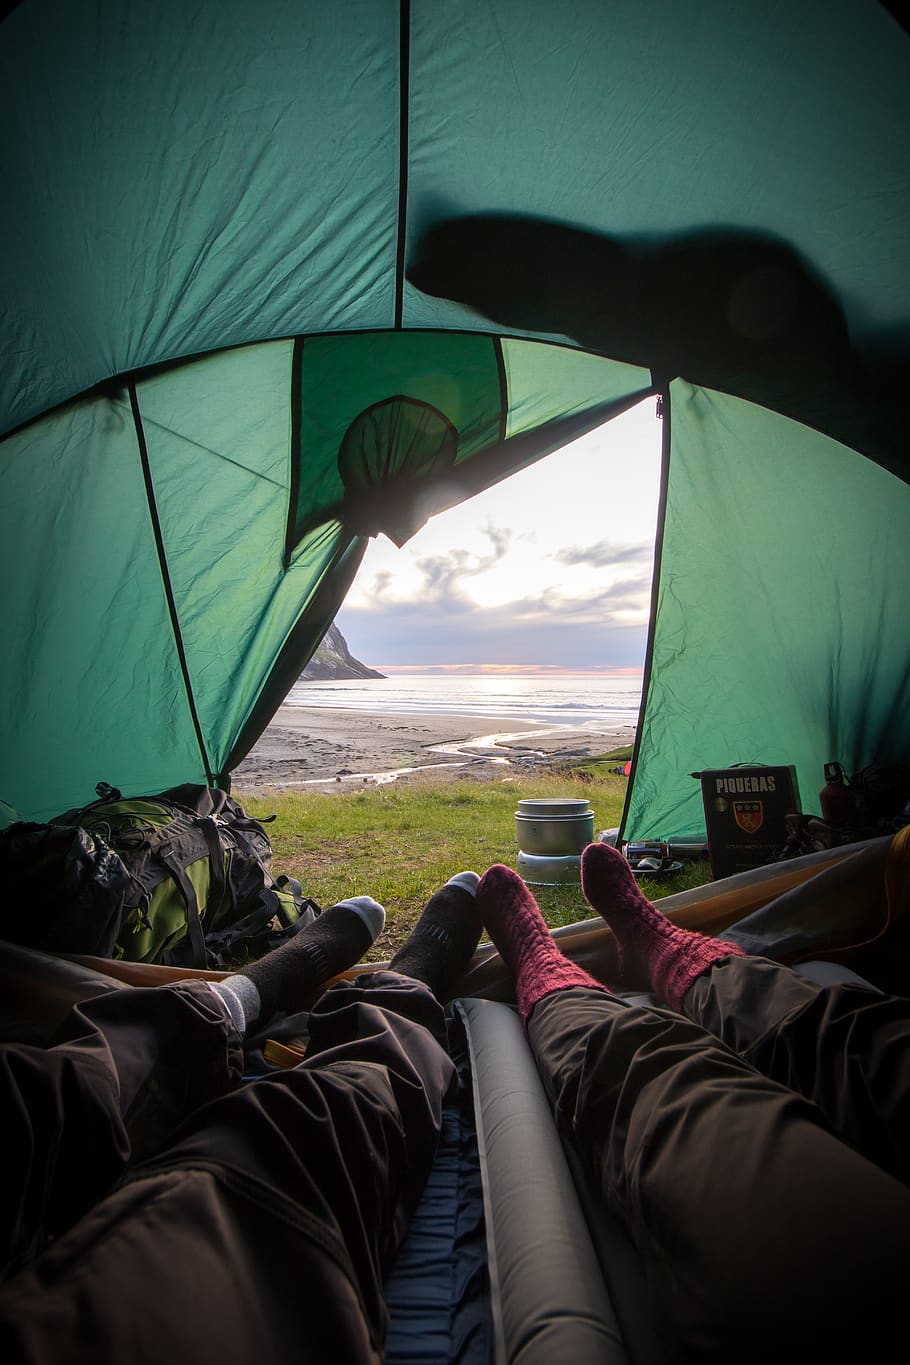 Two People Lying Inside Tent, adventure, backpack, campers, camping